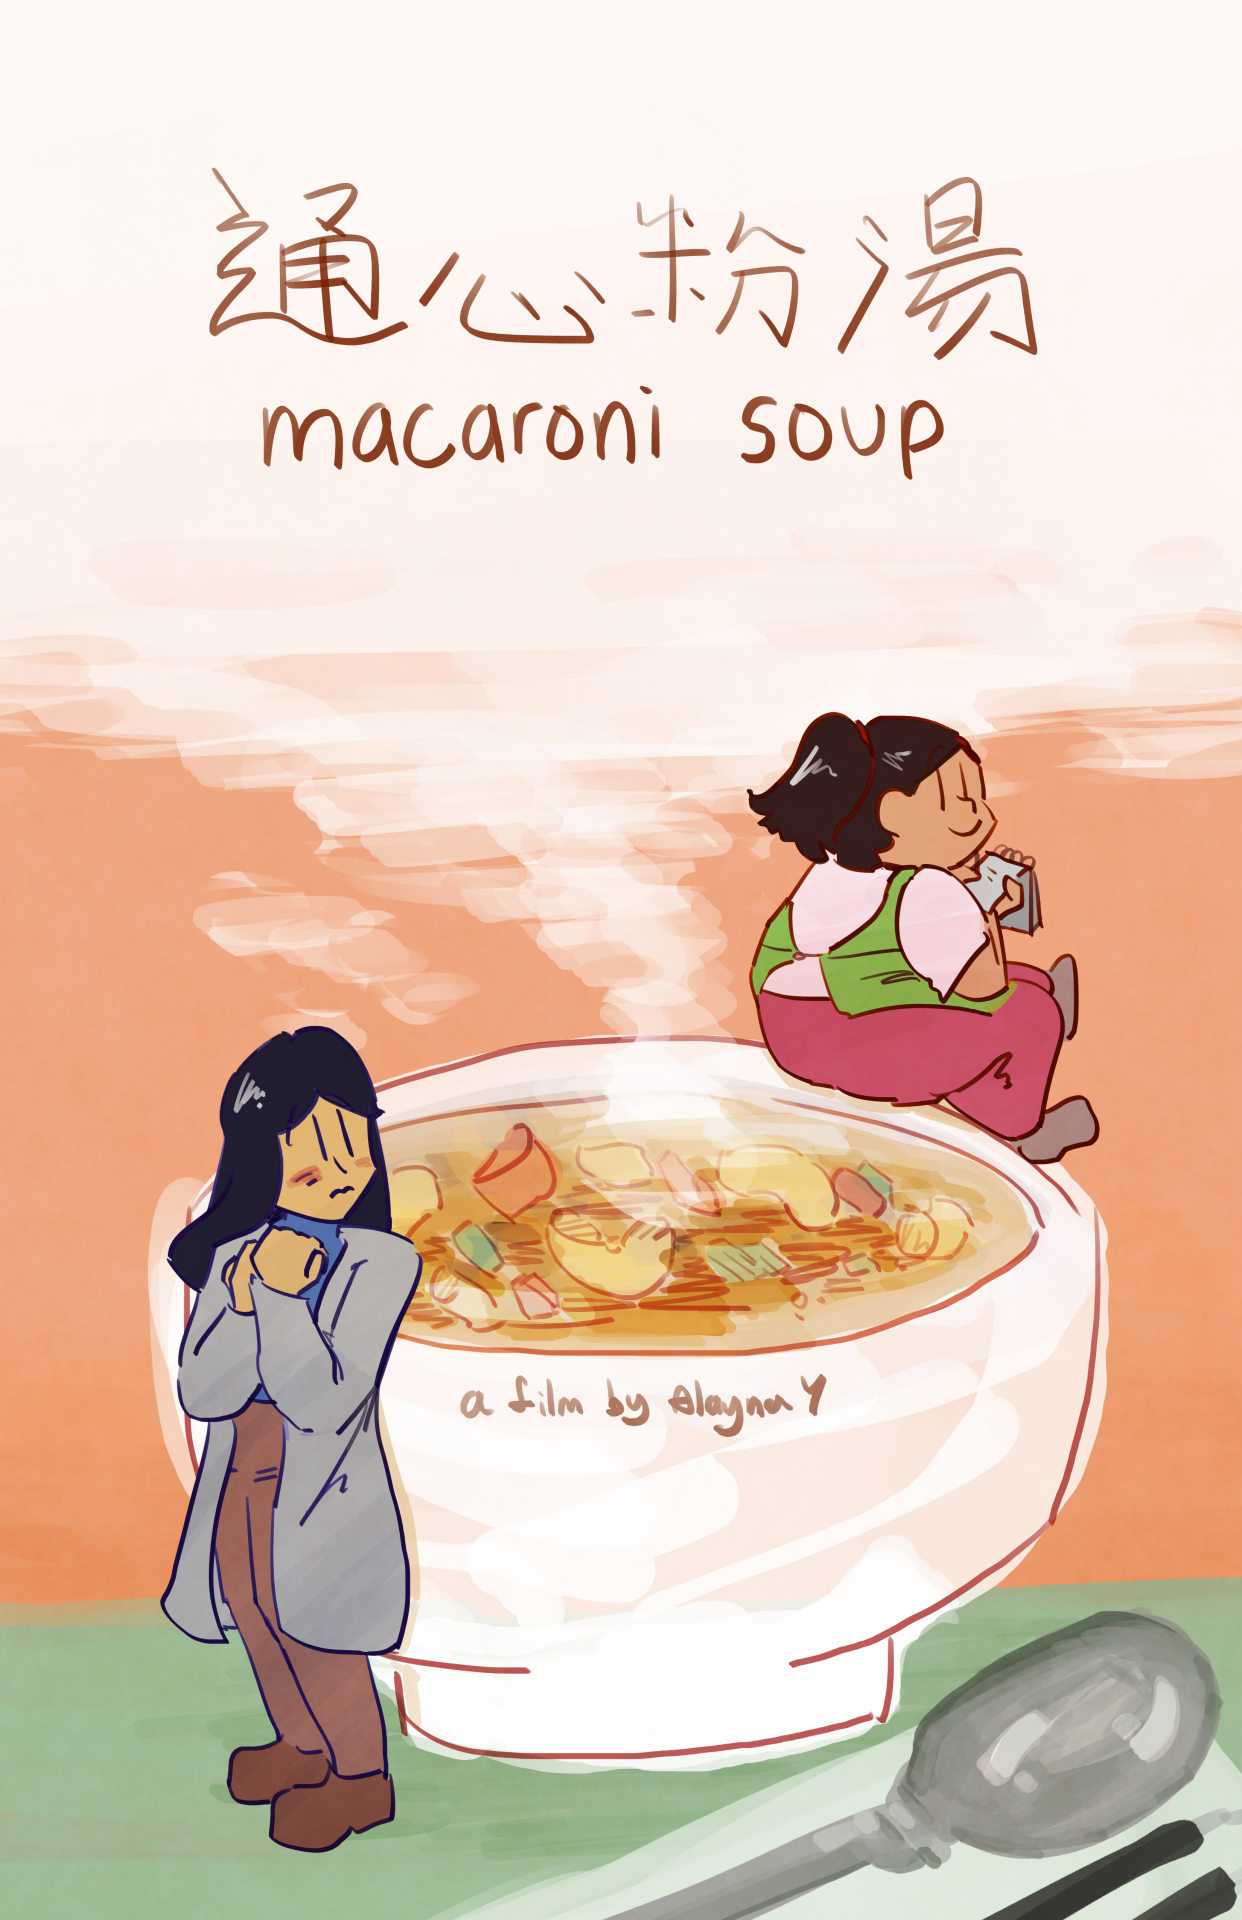 film poster of macaroni soup with a large bowl of soup. the waitress is sitting on the rim, back facing the front. her head is turned looking at the lady. the lady is standing in front of the bowl, hands to her chest, turned away from the waitress but eyes turned to her direction. the waitress is smiling but the lady is nervous looking. the text says 	“Macaroni Soup (通心粉湯), a film by Alayna Y”